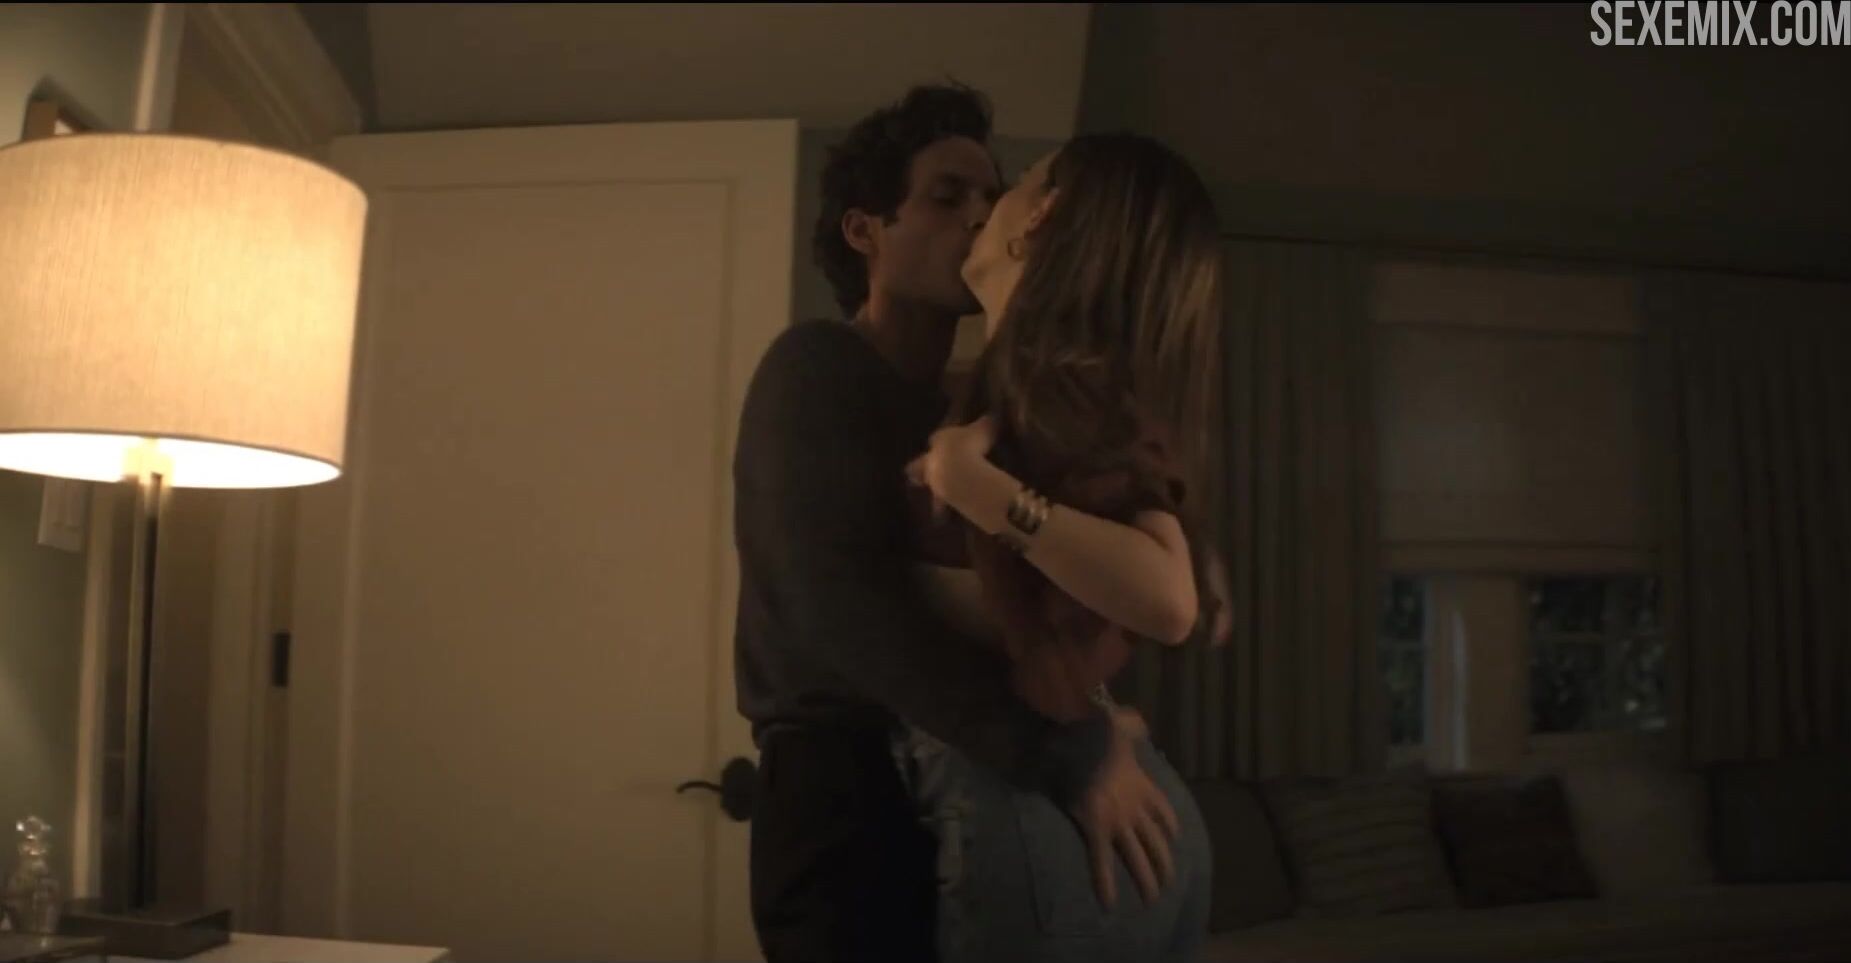 Sex scenes from you penn badgley porn